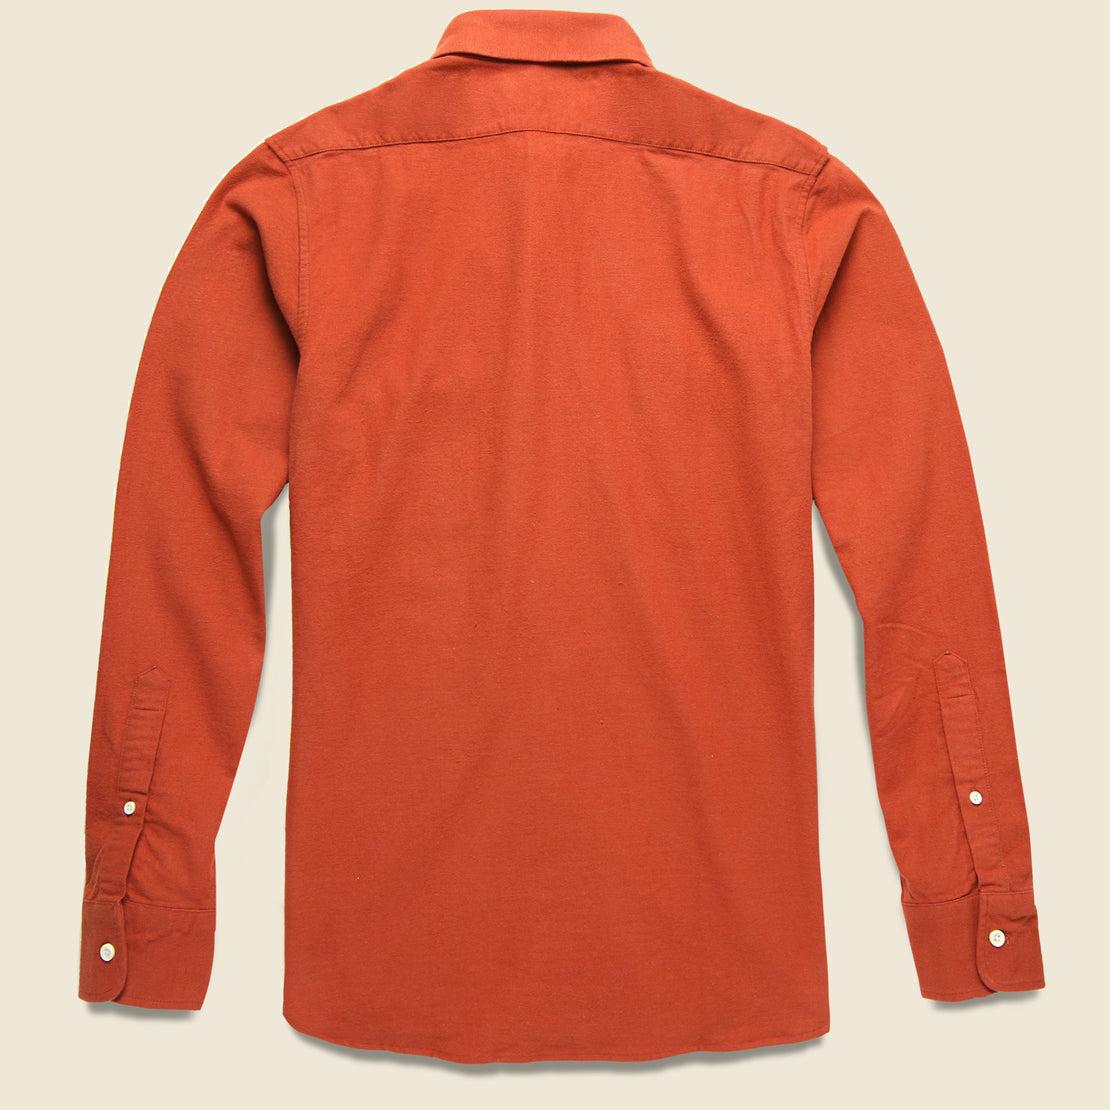 Yosemite Shirt - Dusty Red - Taylor Stitch - STAG Provisions - Tops - L/S Woven - Solid